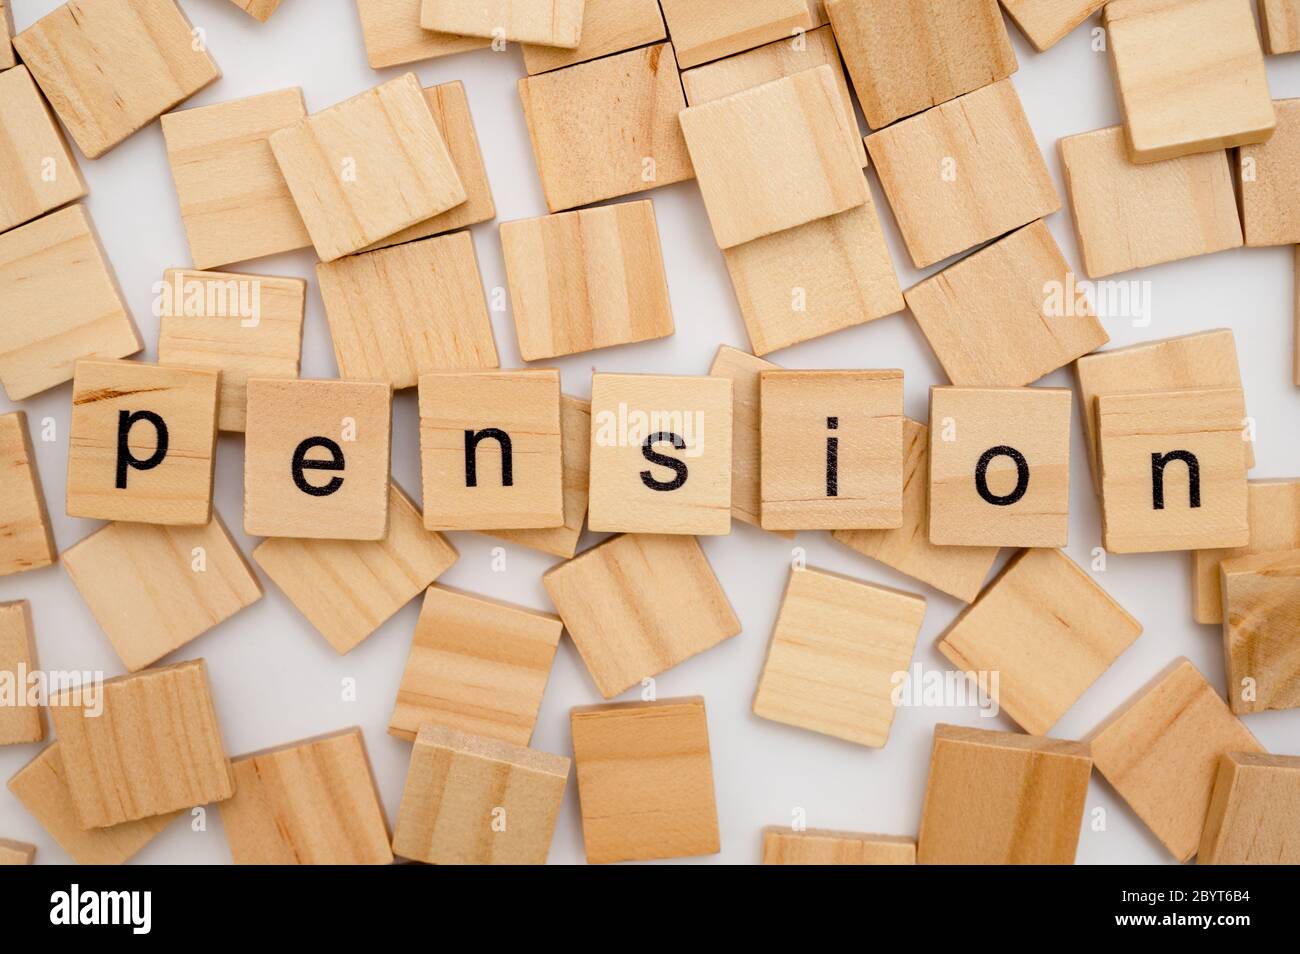 Wood letter tiles spelling word PENSION lying on a pile of tiles Stock Photo